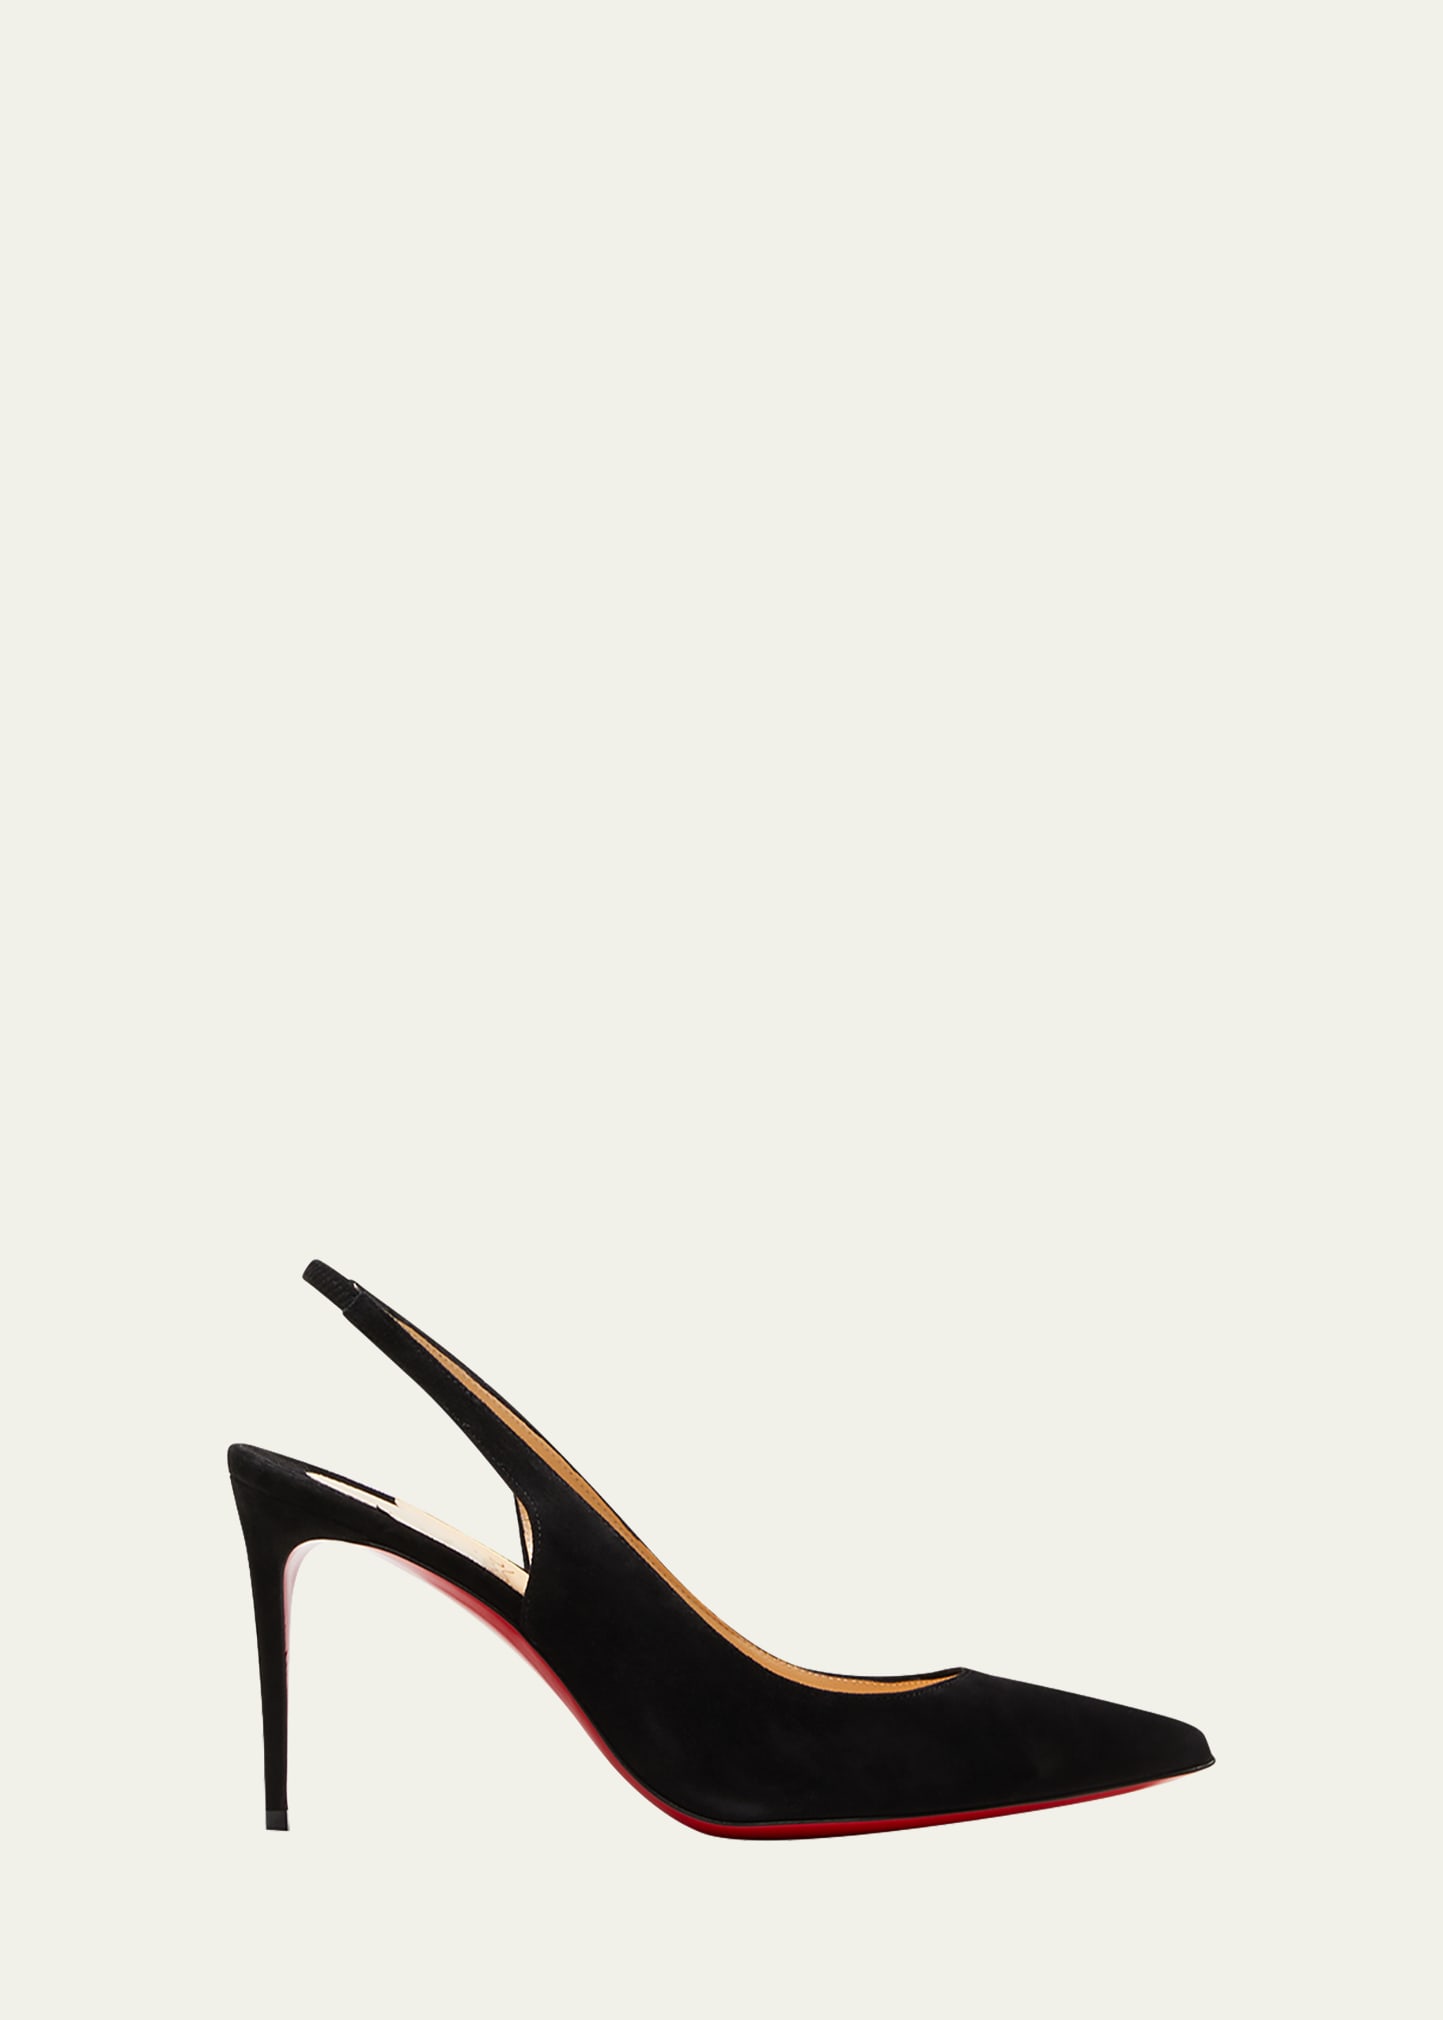 Christian Louboutin Kate Suede Red Sole Slingback Pumps